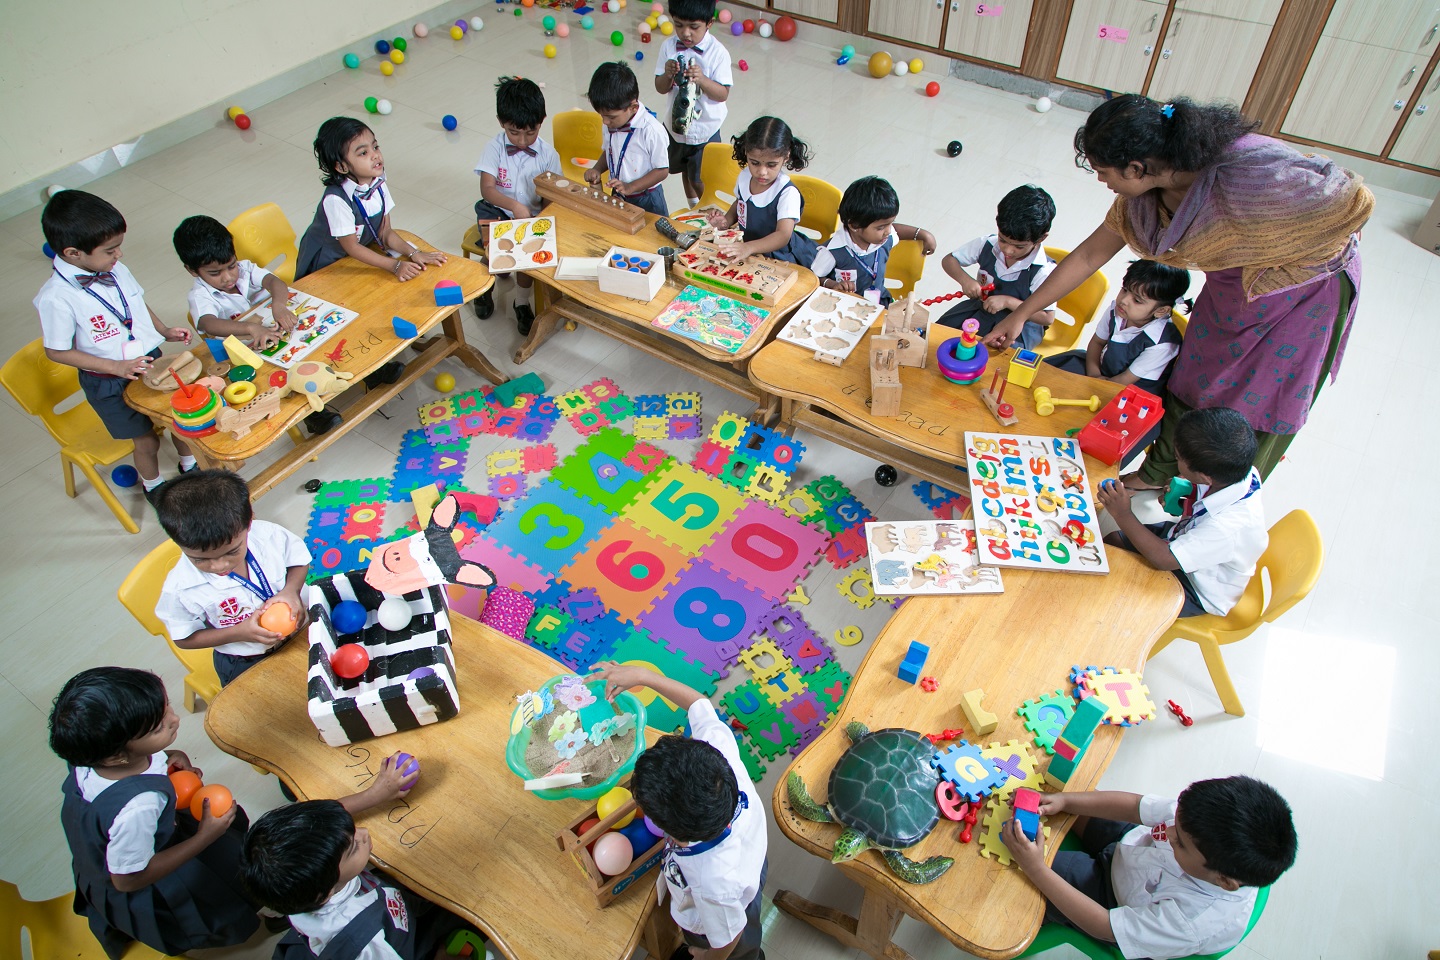 Children learning together in a literacy program